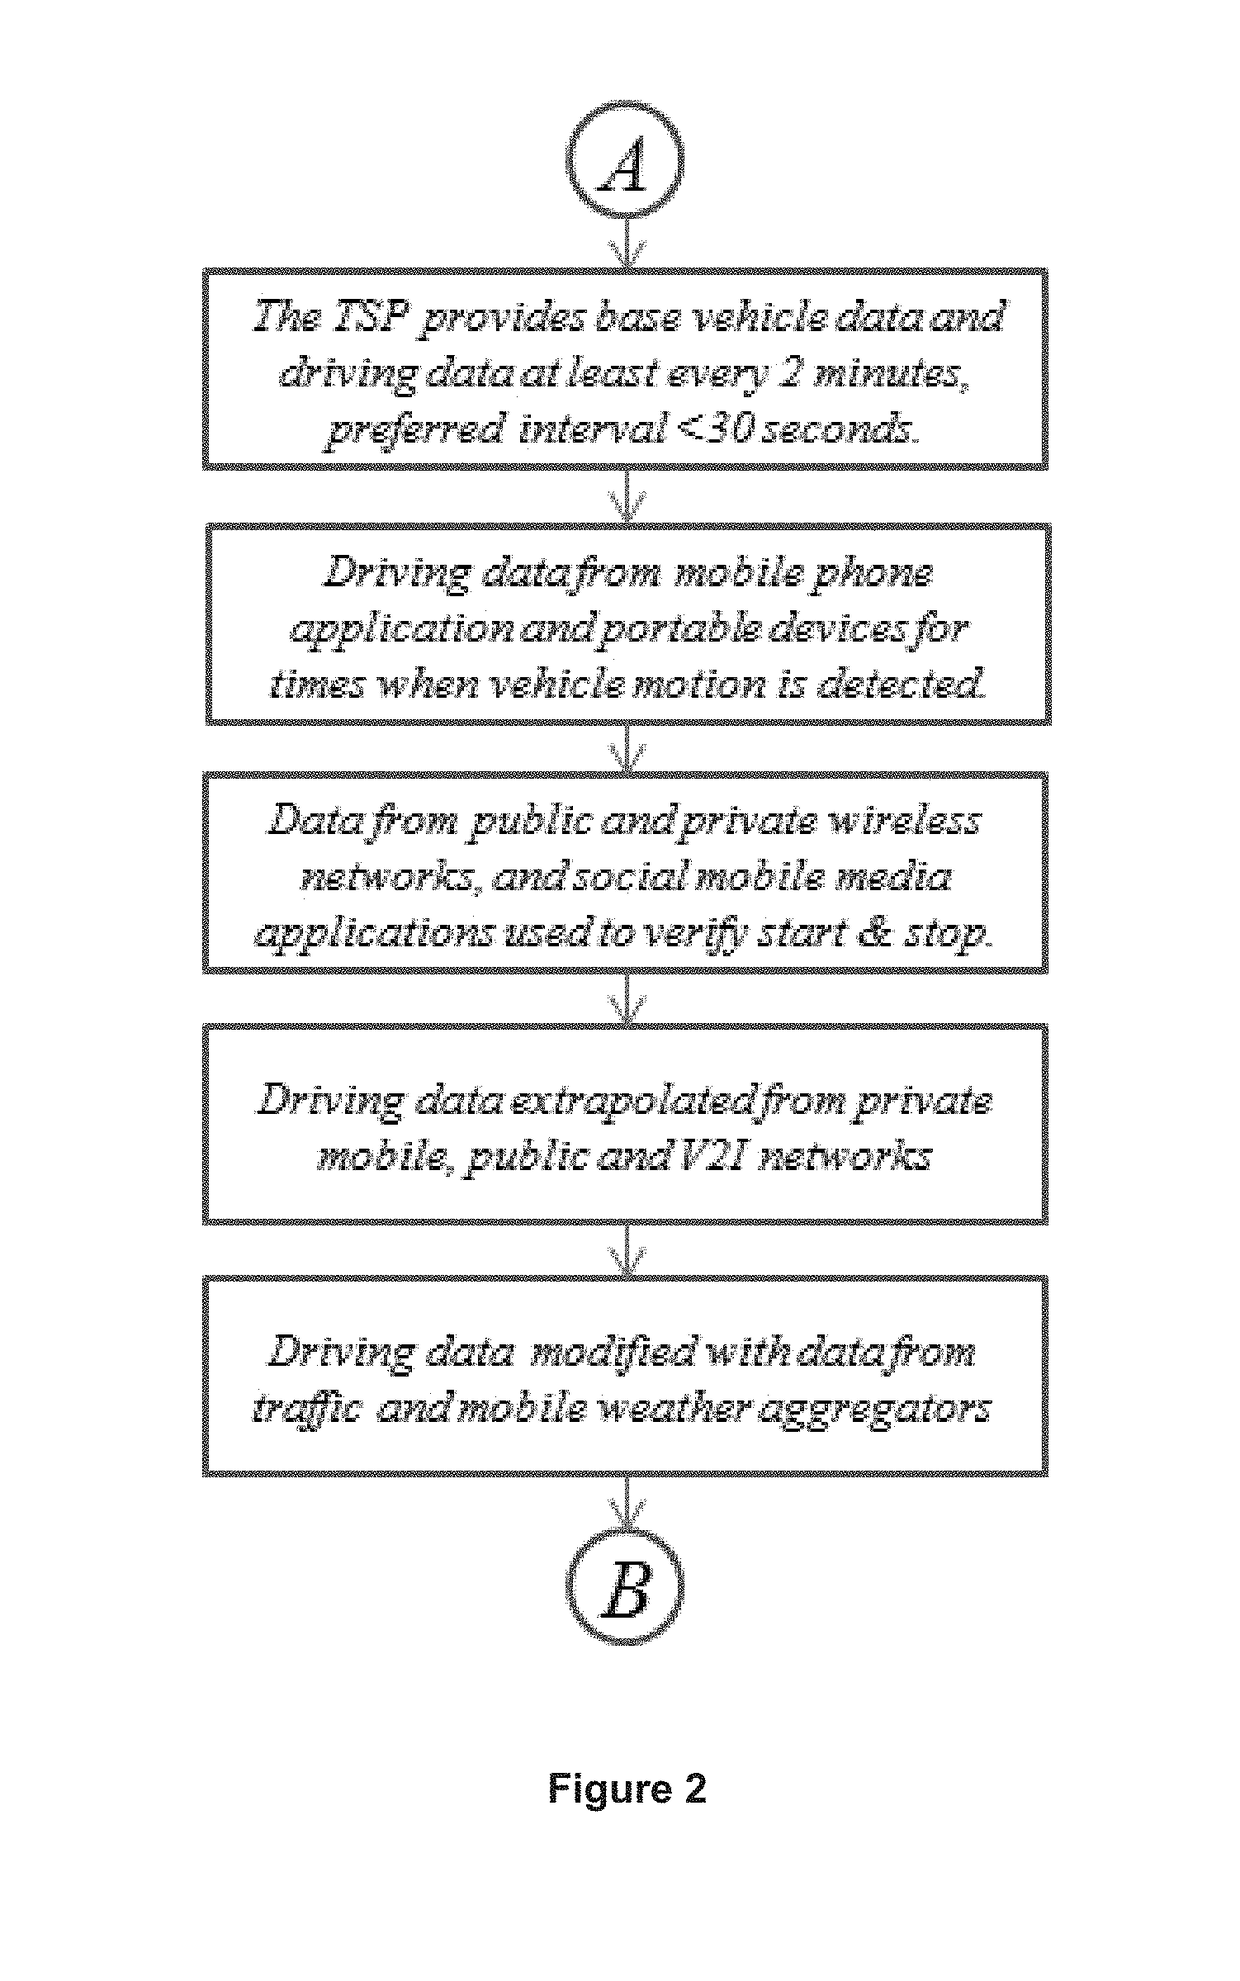 Assessing asynchronous authenticated data sources for use in driver risk management